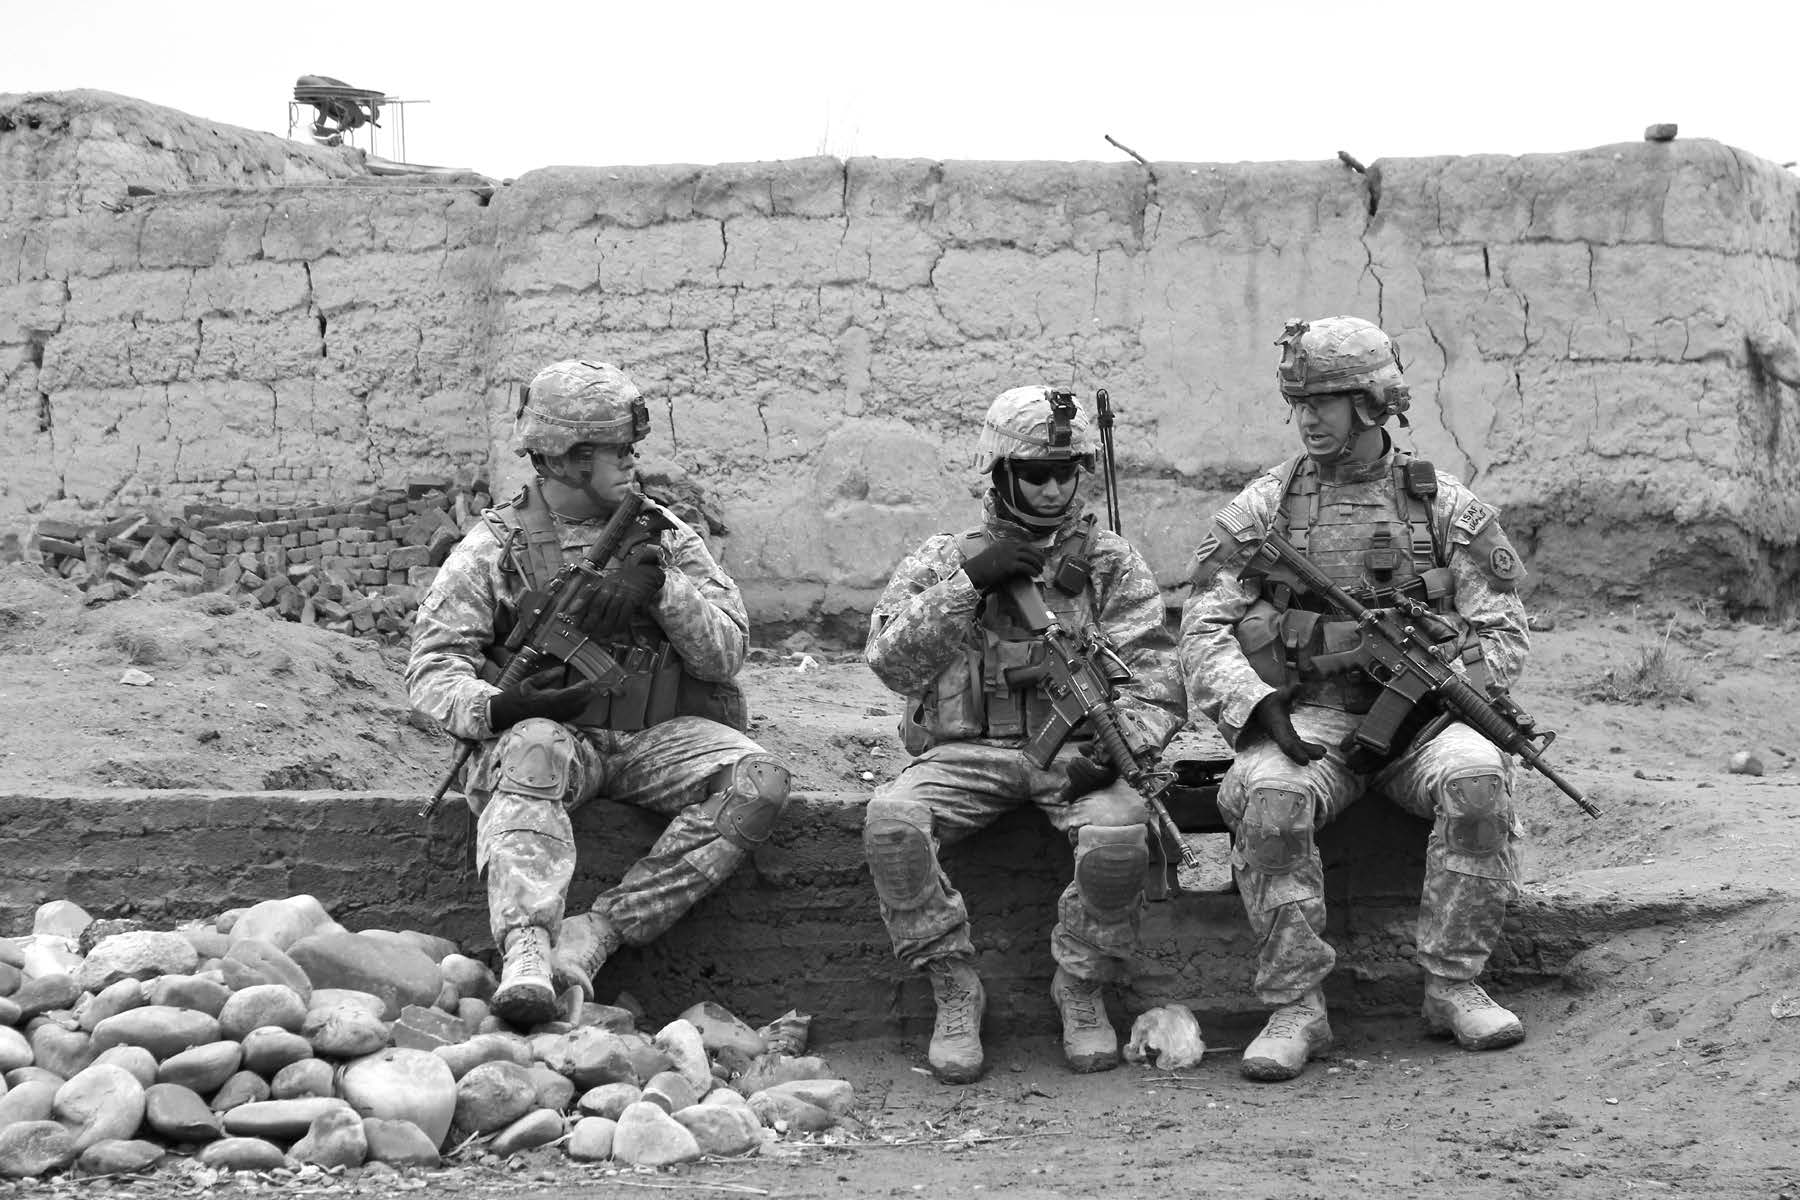 American soldiers enjoy a brief rest during a search mission. Courtesy of J. Joseph DuWors.